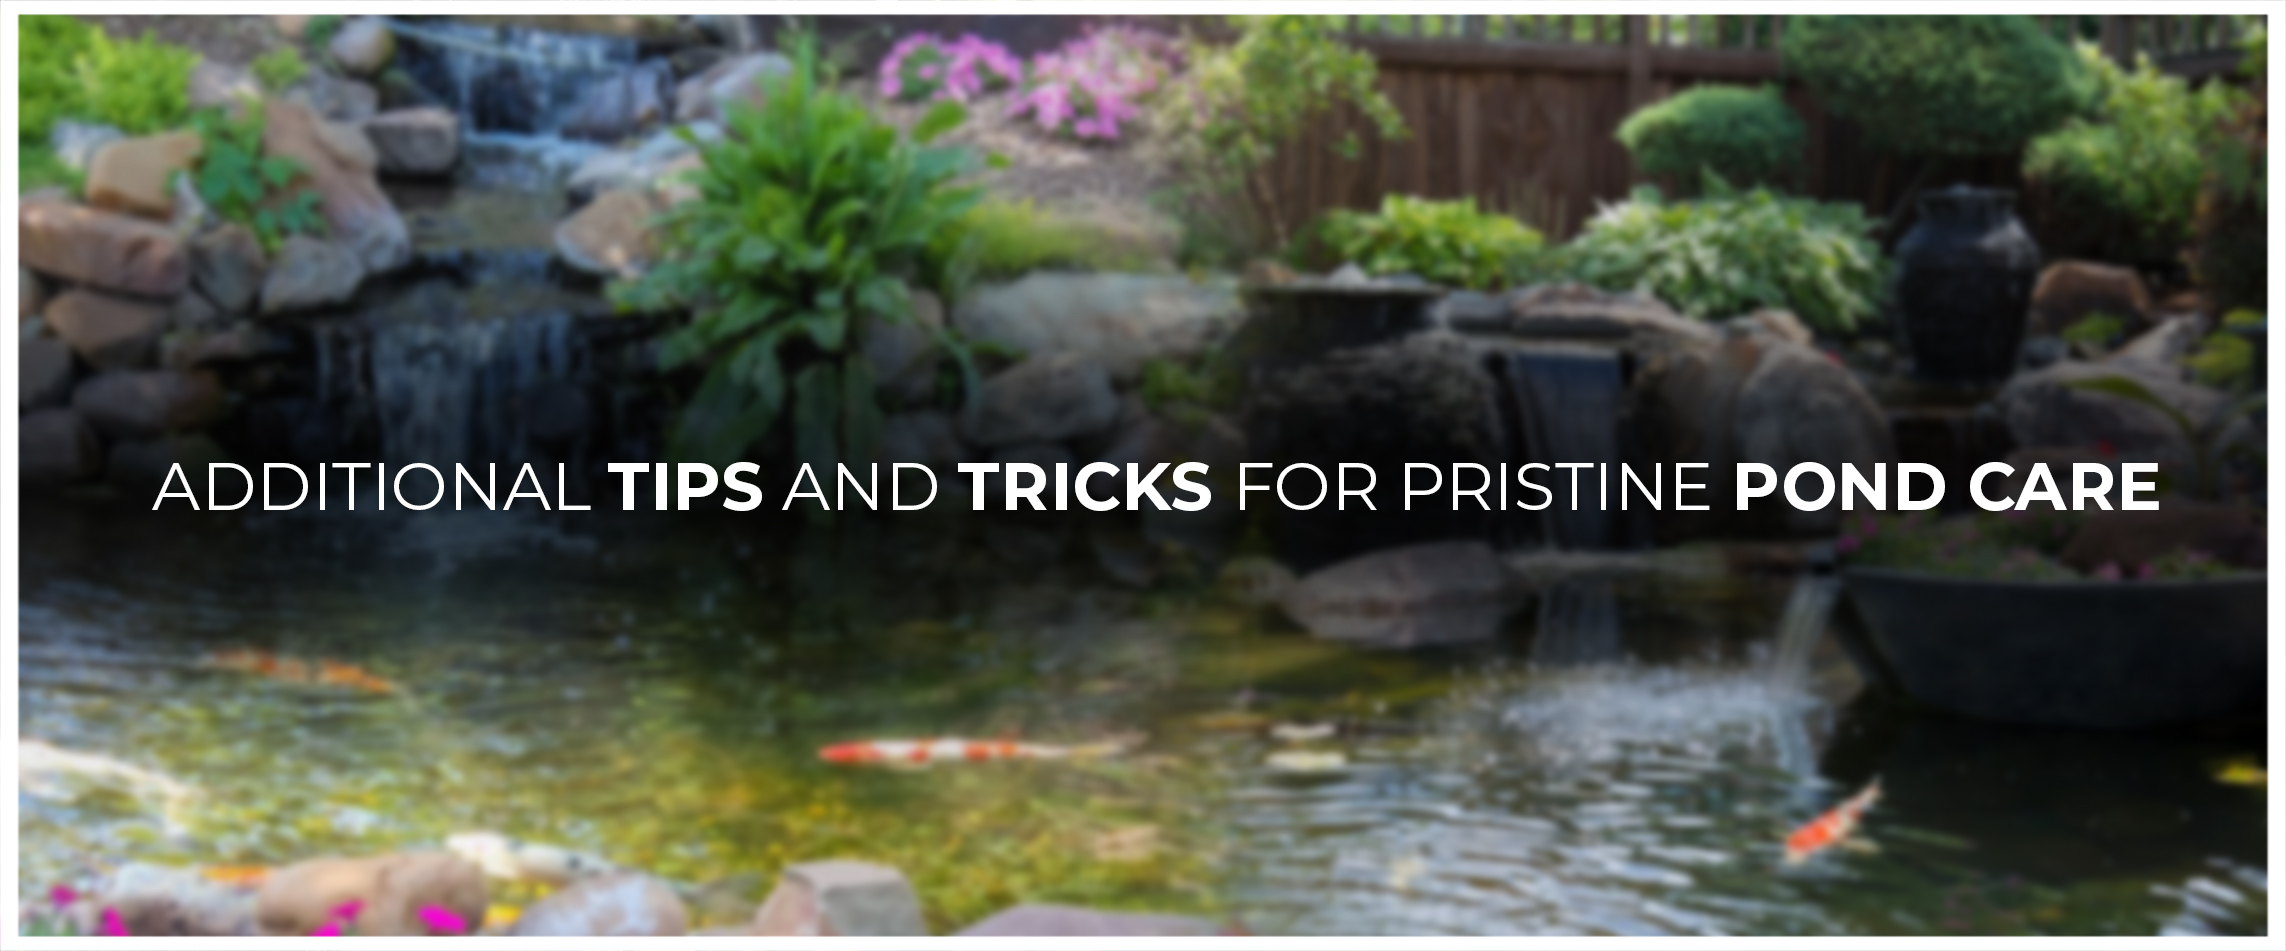 Additional Tips and Tricks for Pristine Pond Care